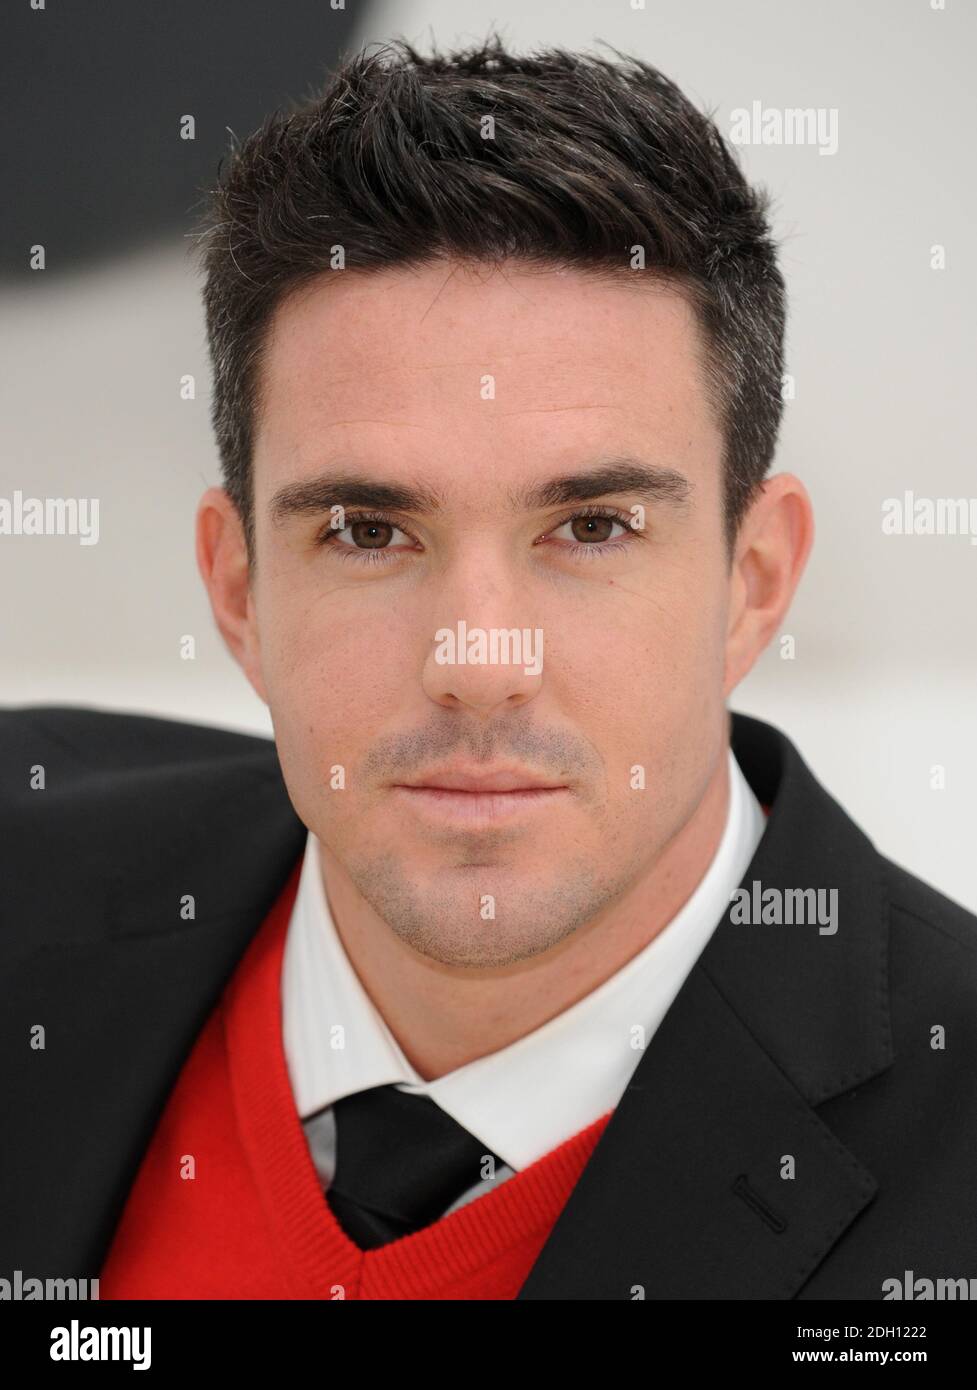 Kevin Pietersen is the new Brylcreem Boy and face of the new Brylcreem product range, The Future Gallery, London. Stock Photo